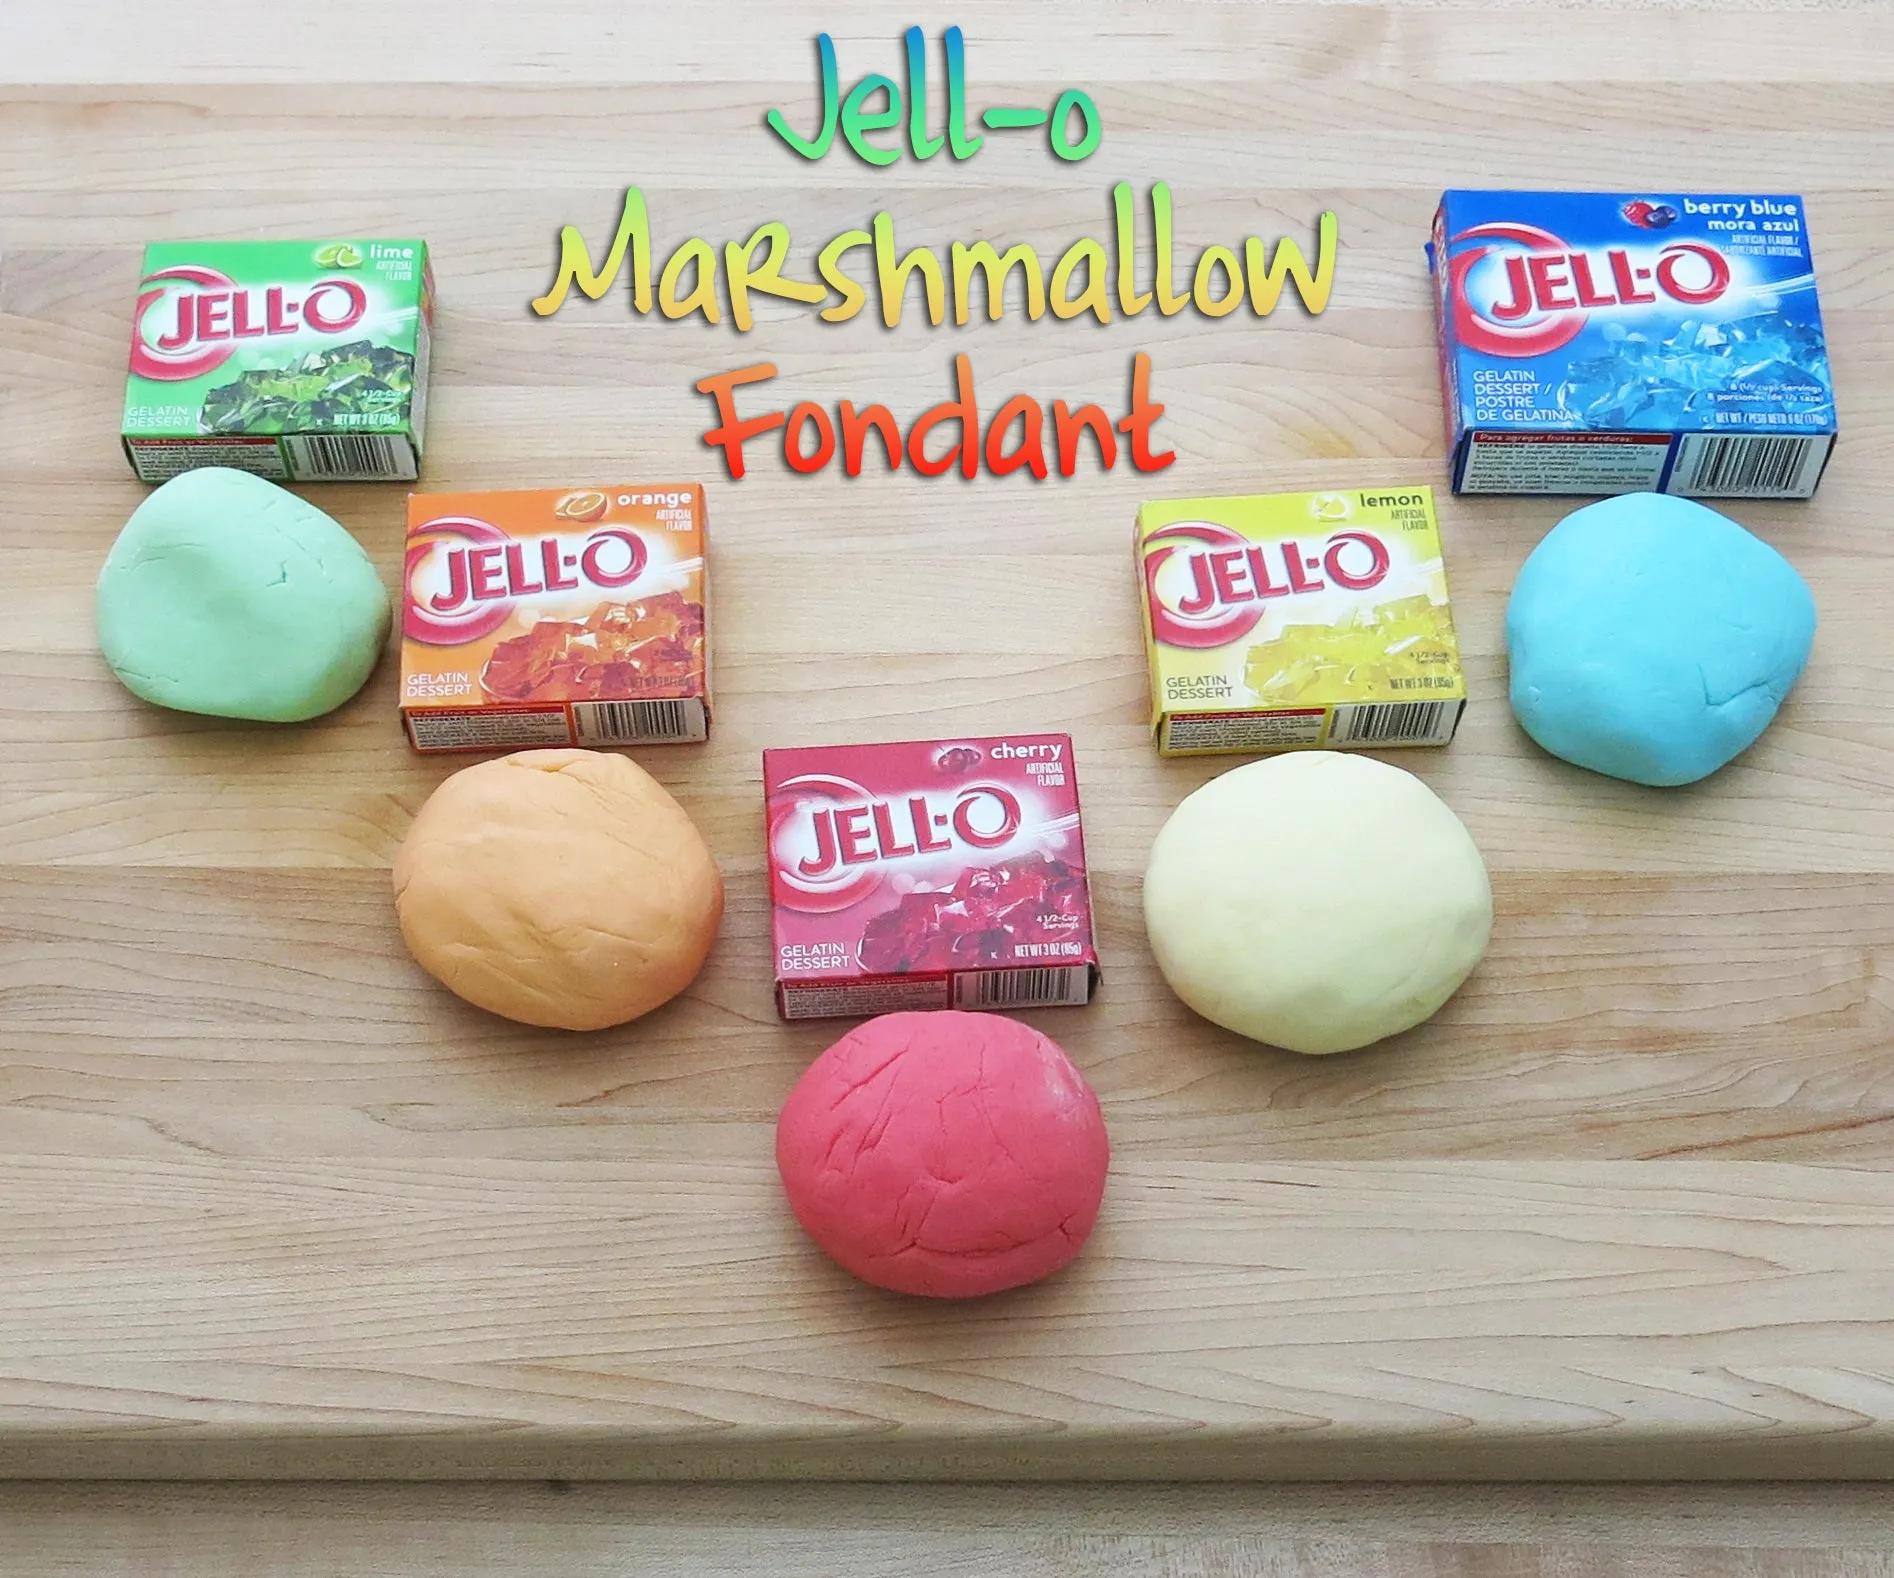 Jell-O Marshmallow Fondant: 4 Steps (with Pictures)